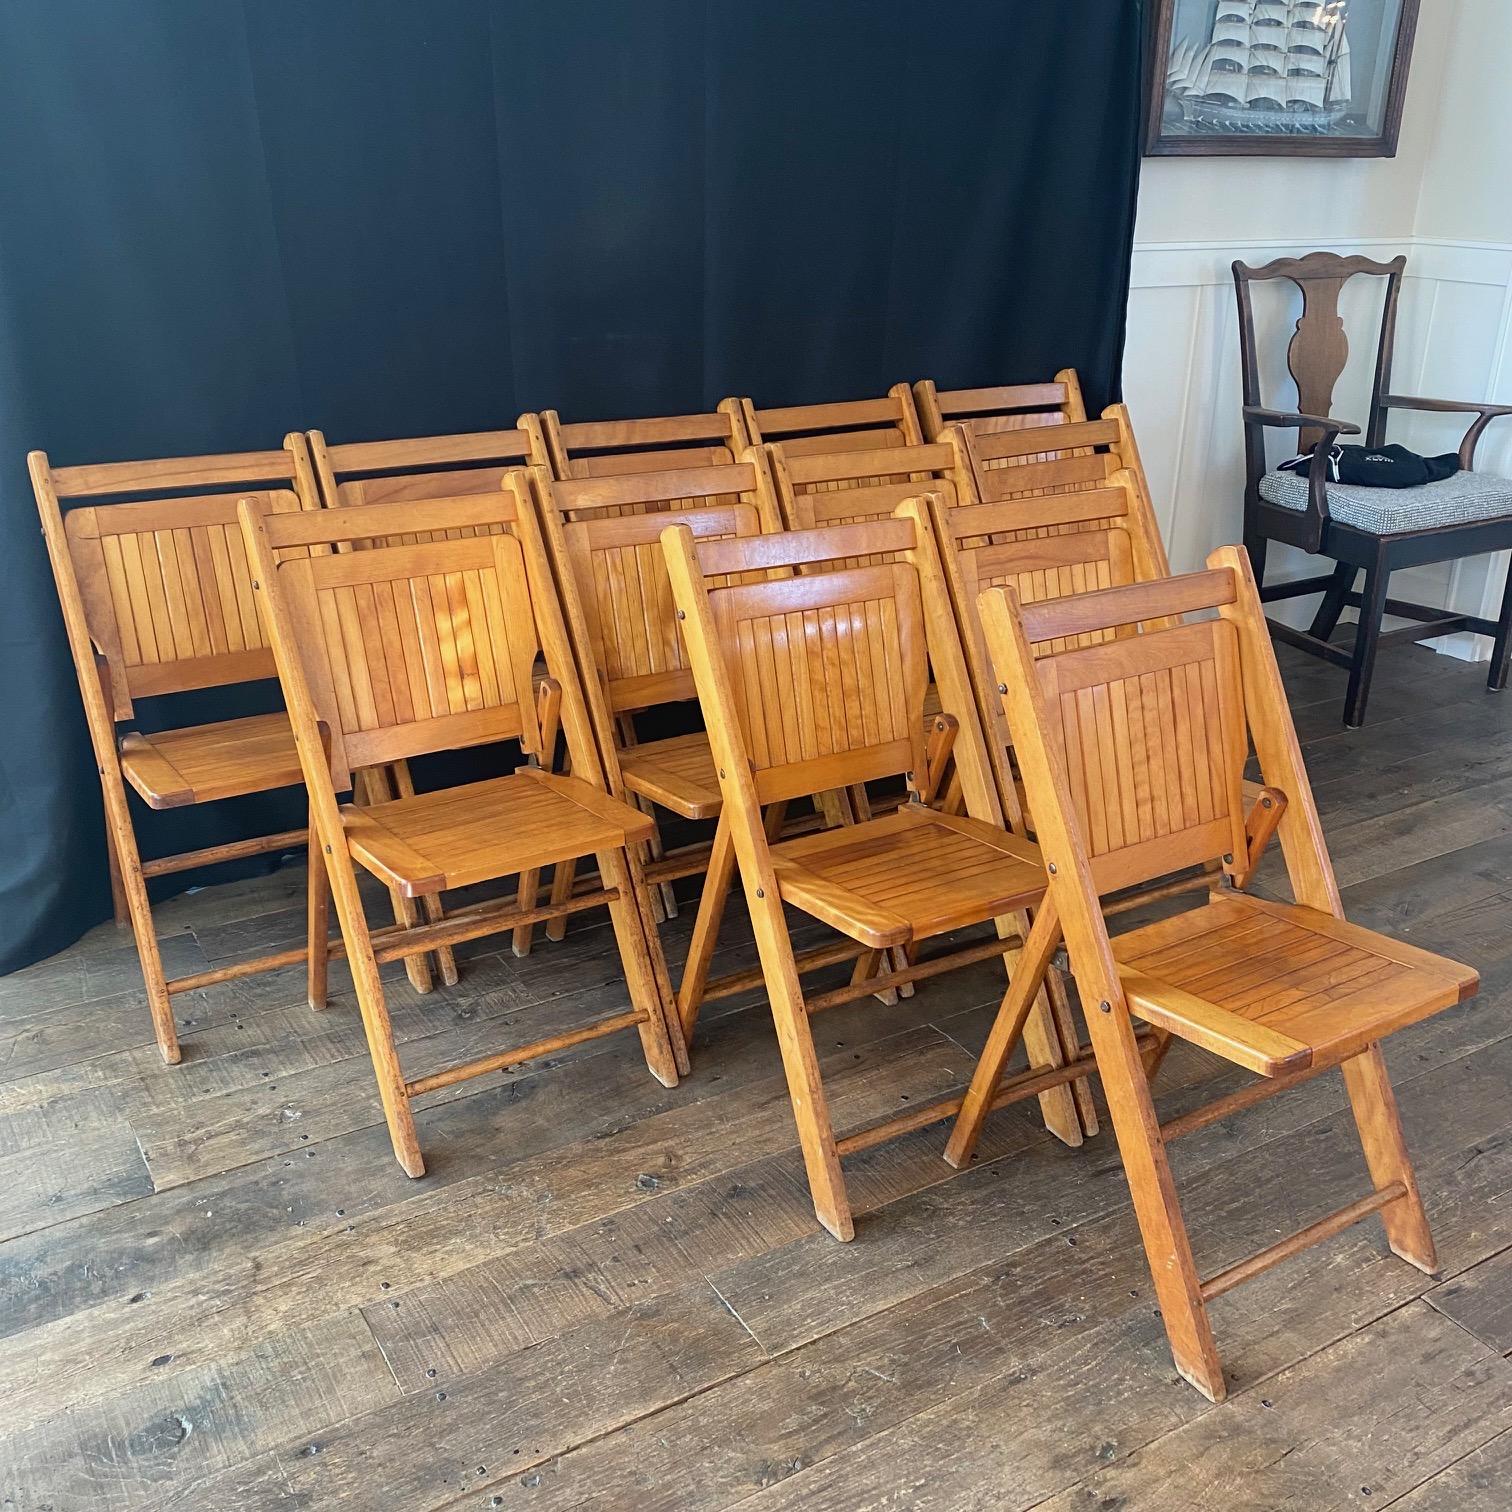 1940s wooden chairs